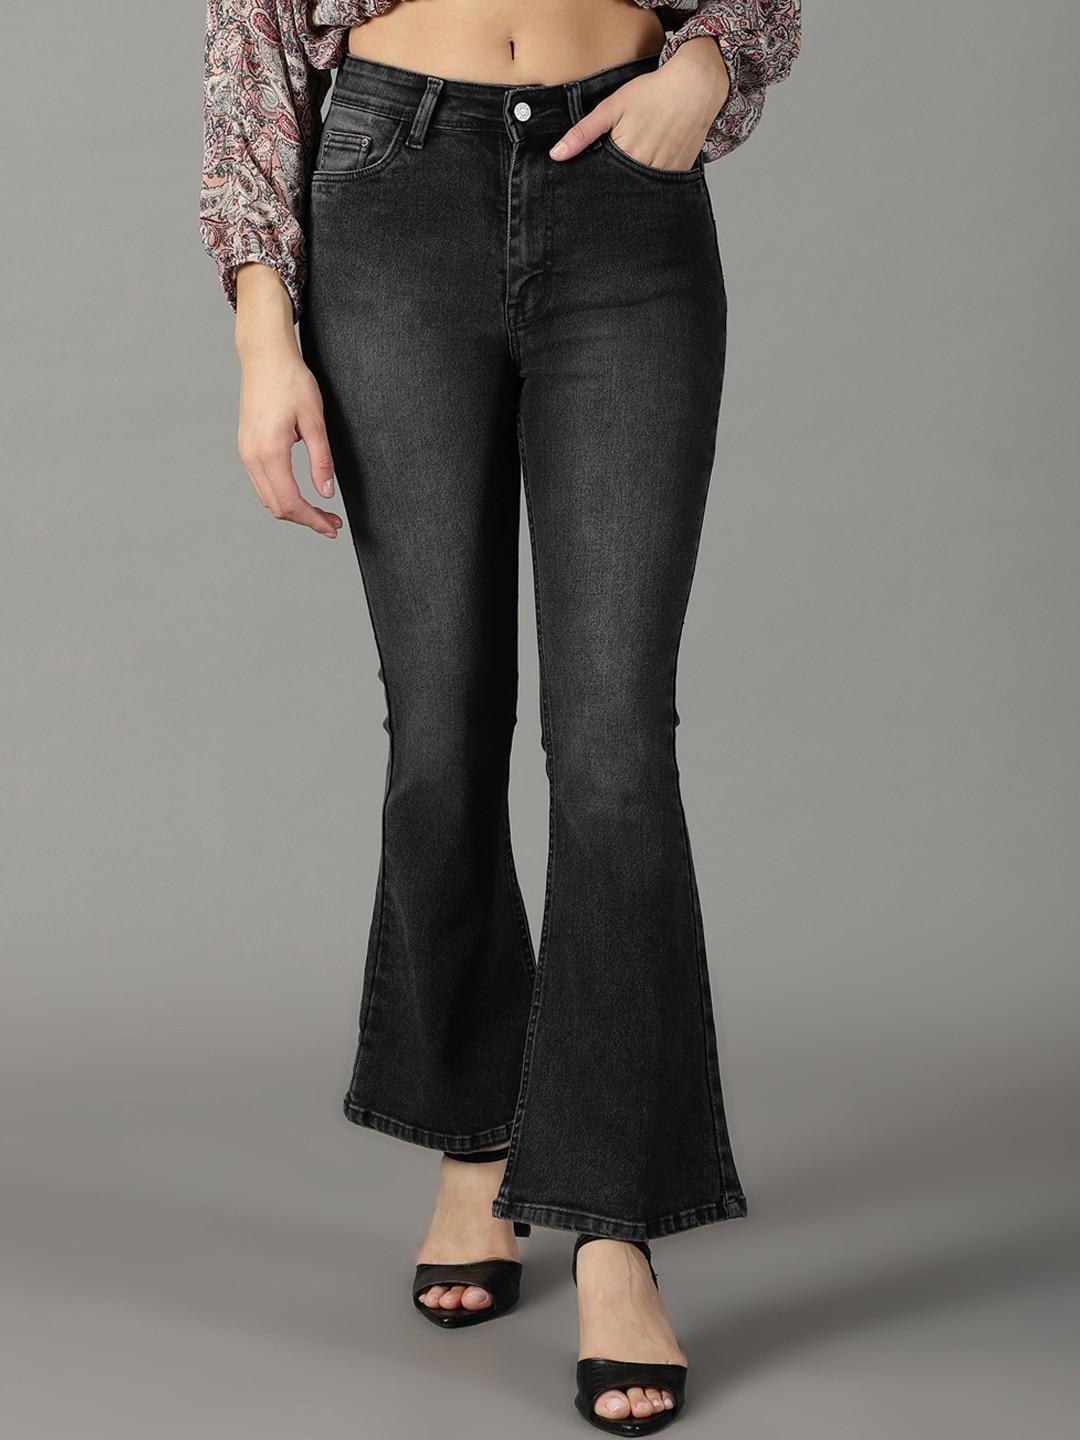 showoff-women-bootcut-high-rise-light-fade-acid-wash-stretchable-jeans